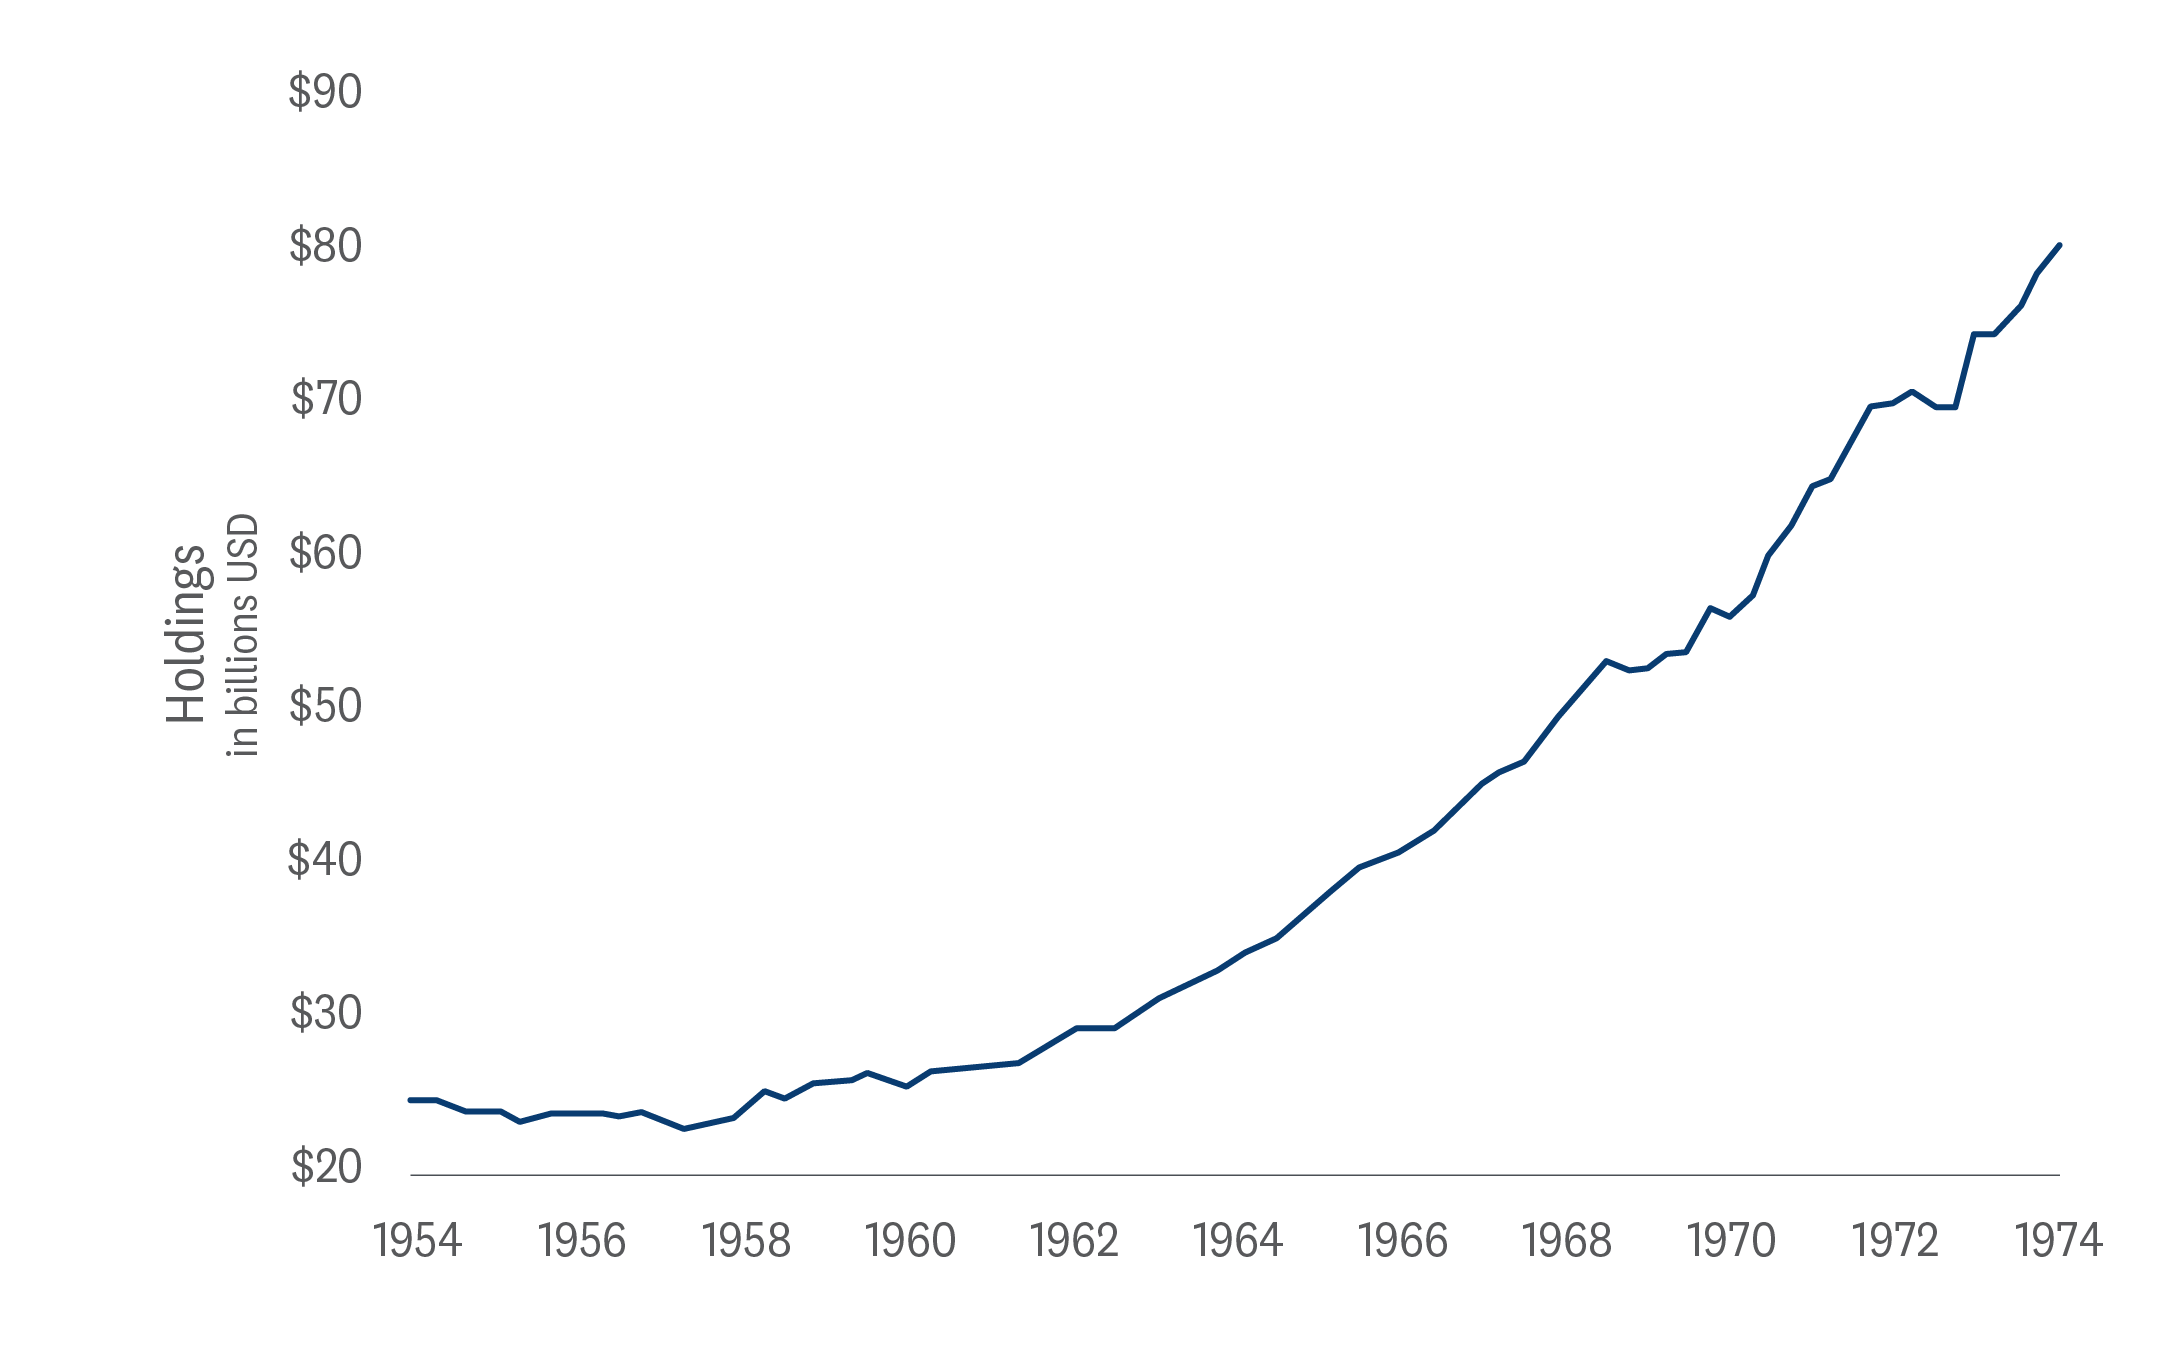 Line graph of Federal Reserve ownership of US Treasuries from 1954 to 1974. The Federal Reserve owned $25 billion in U.S. Treasuries in 1954 and steadily increased their holdings over a 20 year period, ending with $80 billion in 1974. 